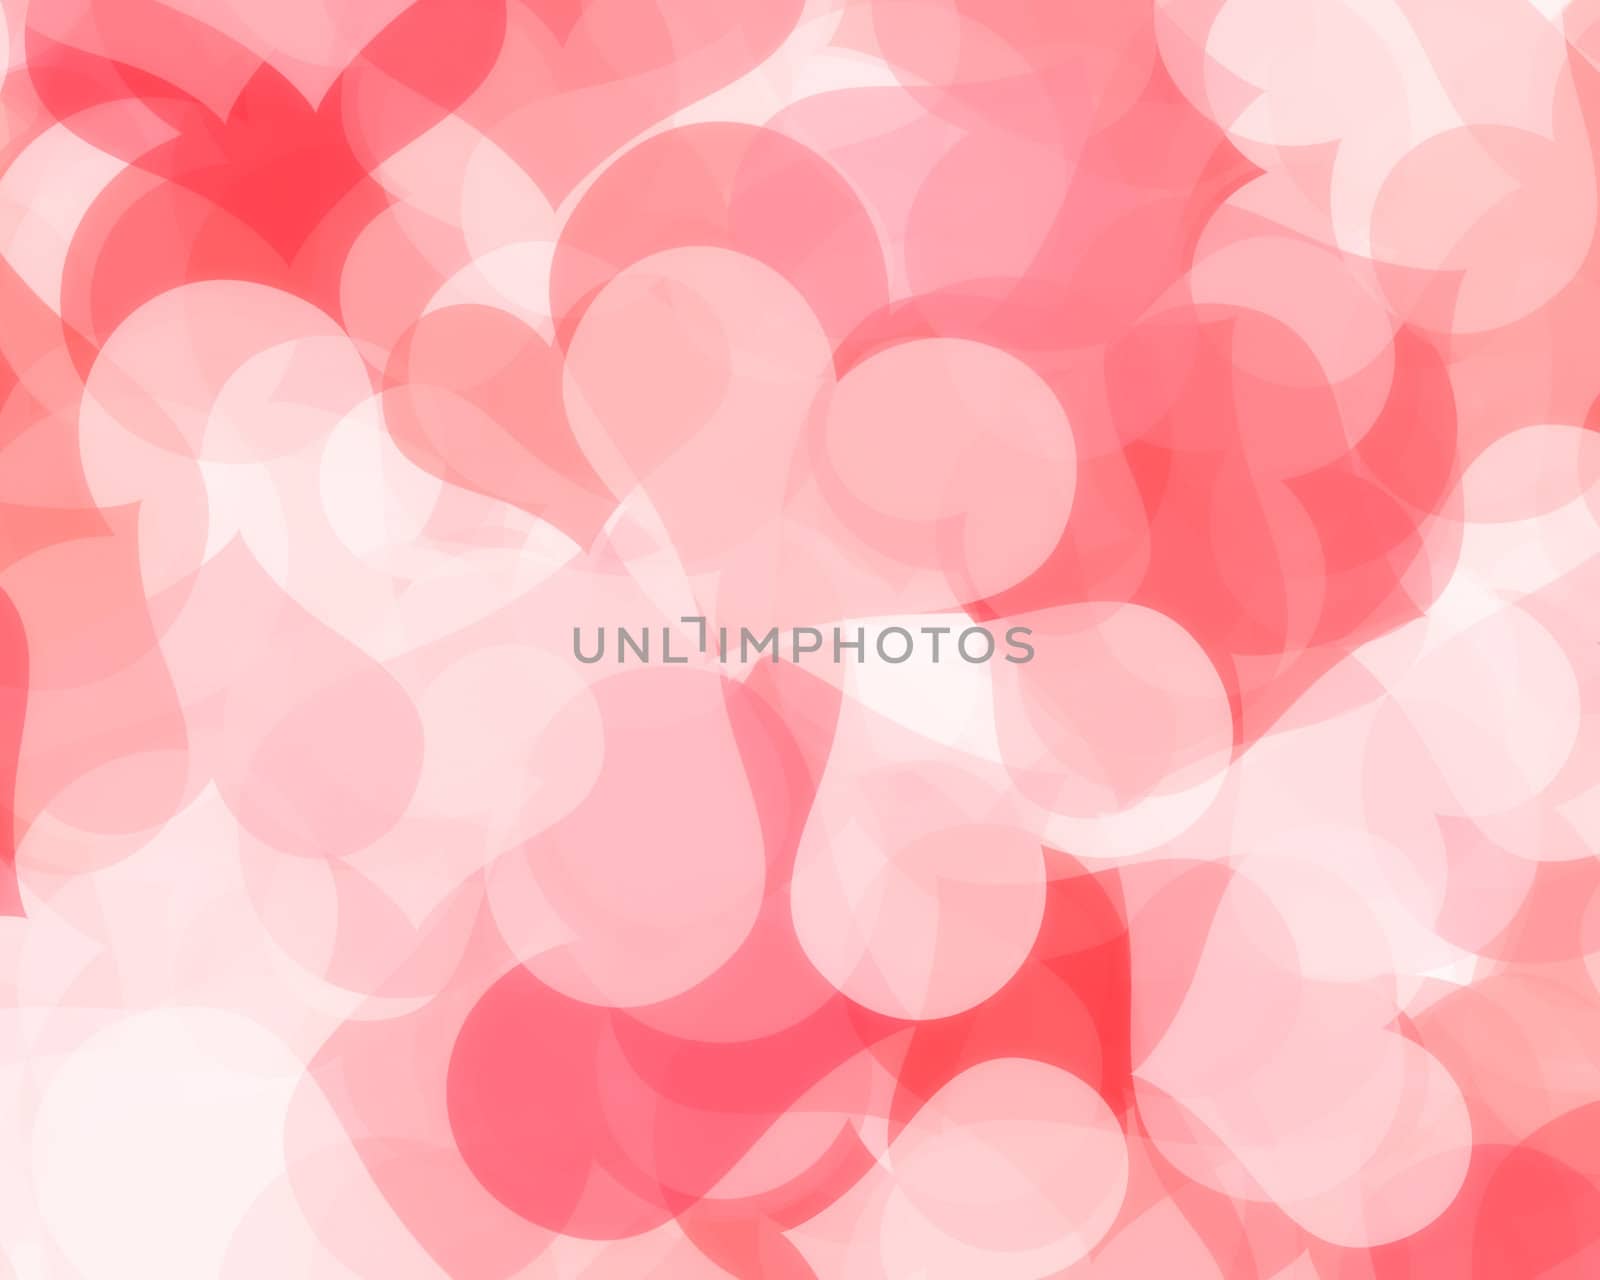 Digital illustration of a conceptual theme of hearts